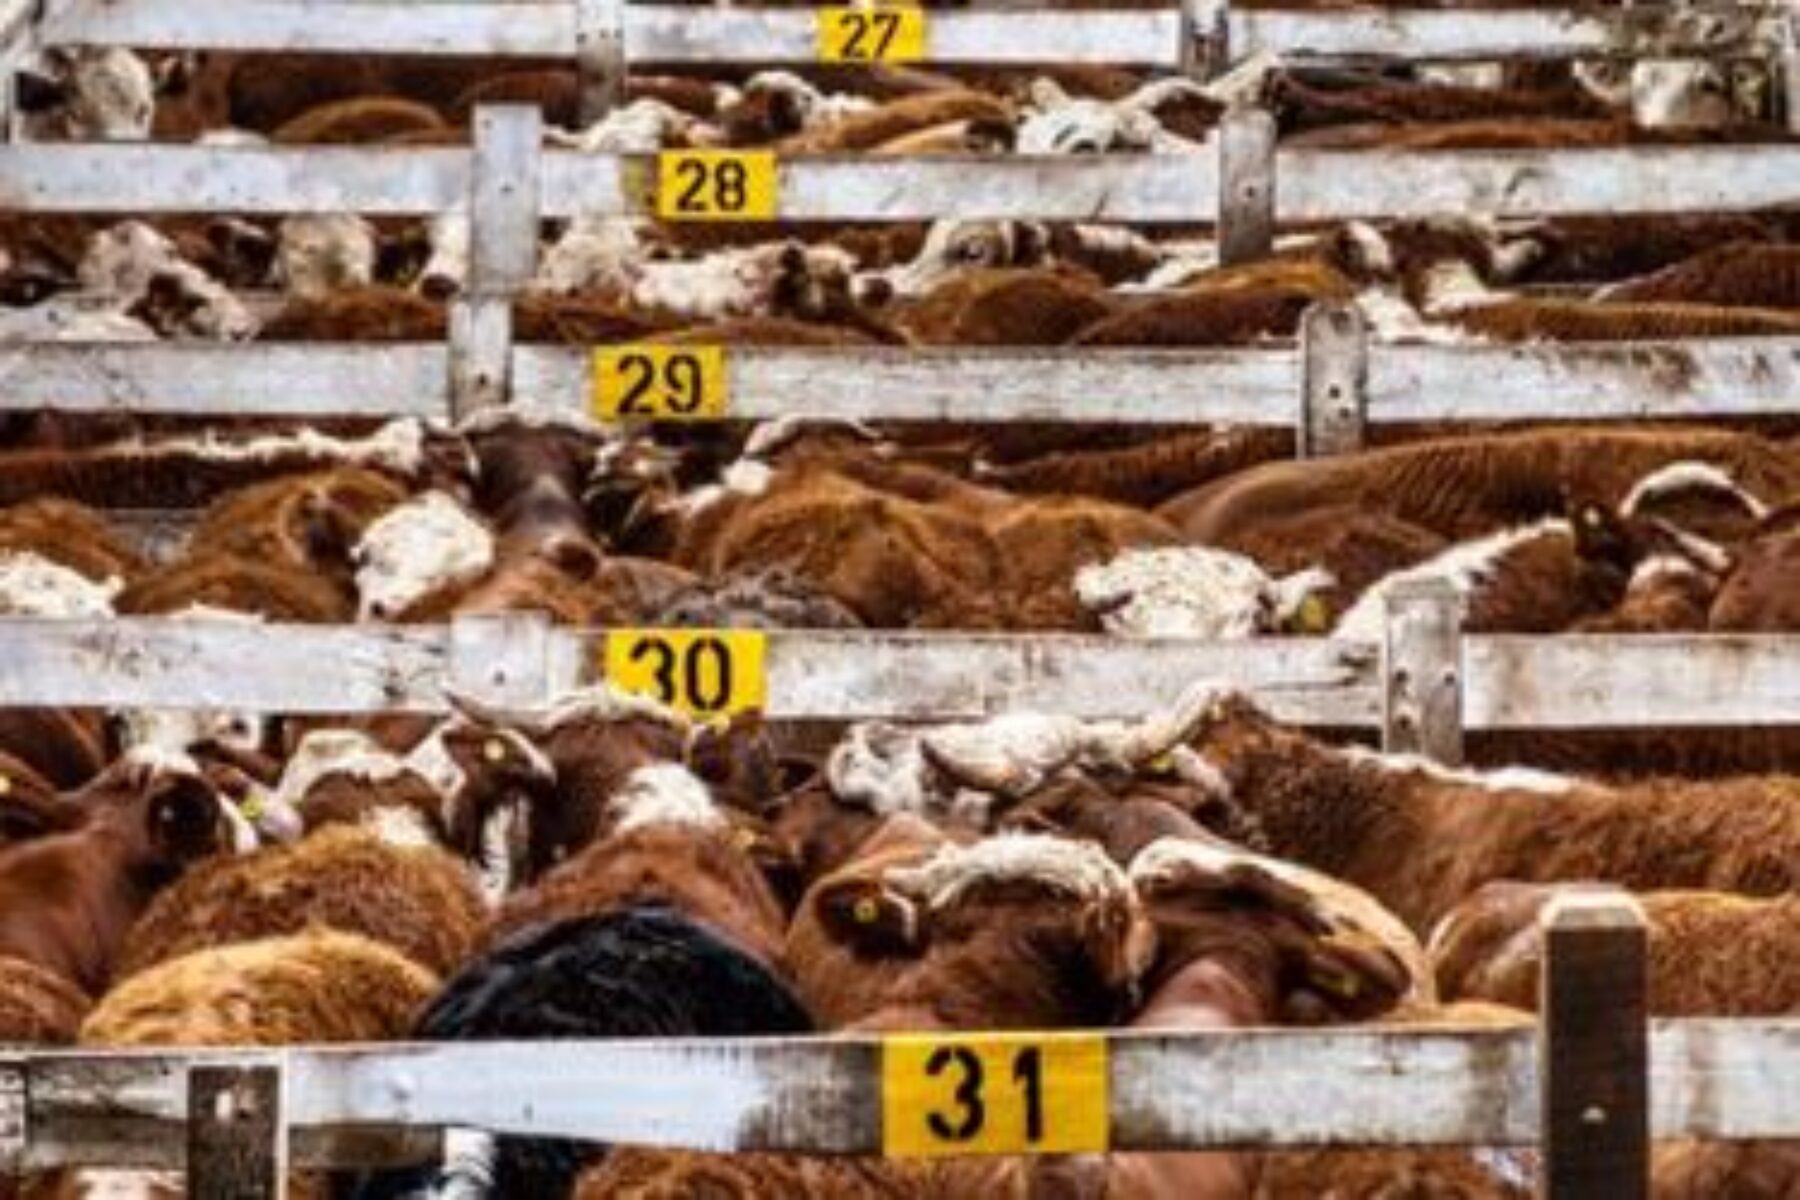 A view of beef cattle in holding pens of a slaughterhouse with the animals divided by wood fences labeled with painted row markers indicating row 27 through 31 to accompany the blog post discussing the EPA's wastewater rule updates for slaughterhouses